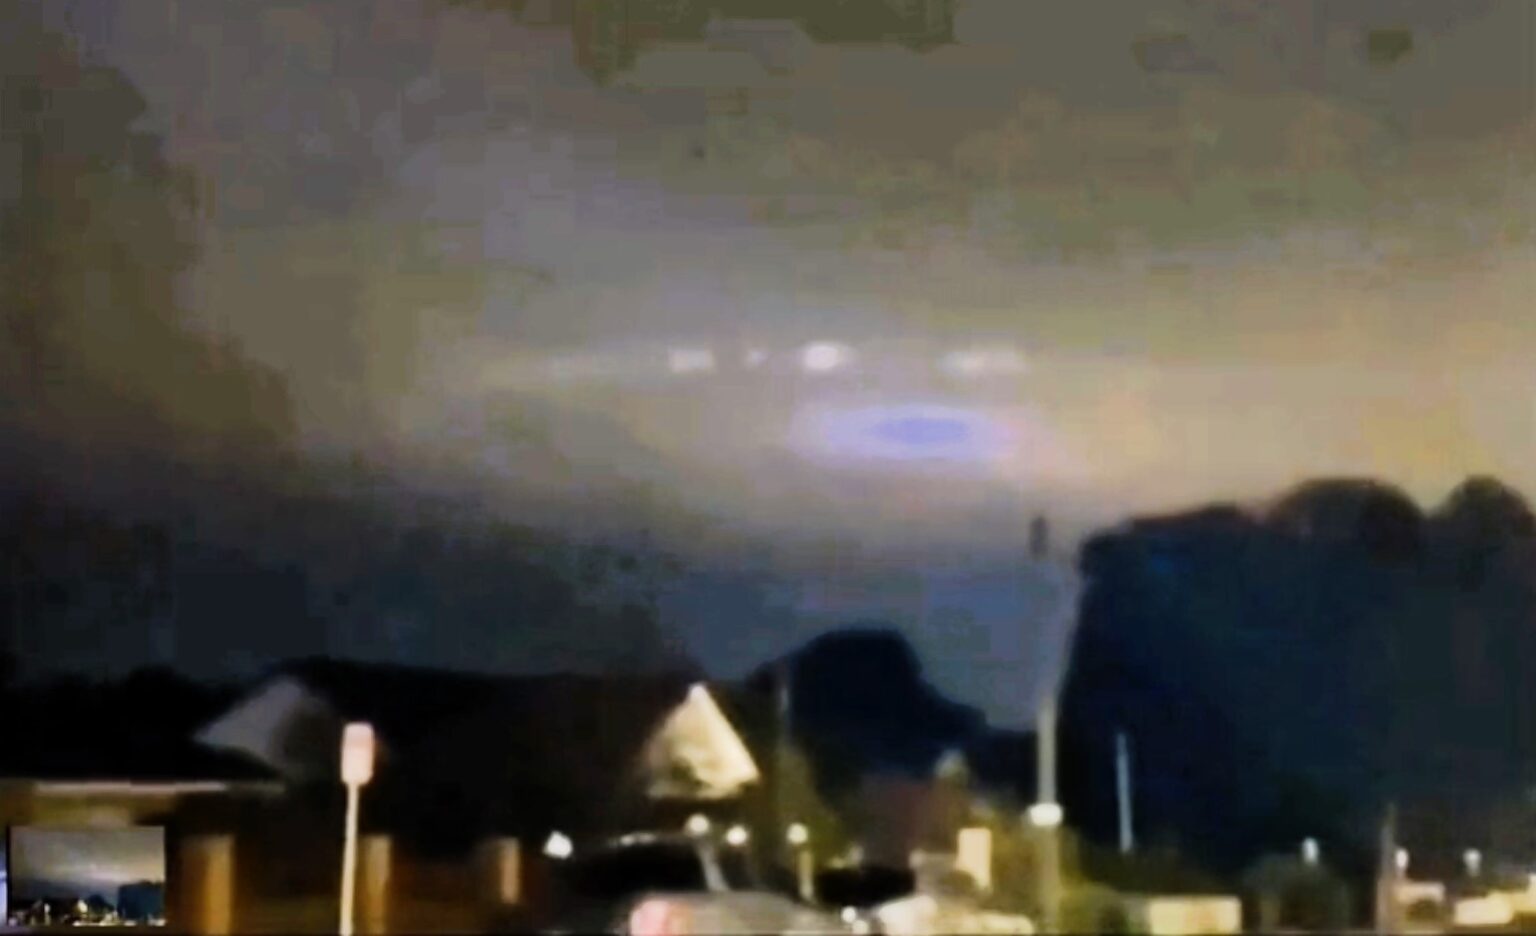 A suspected alien mothership with multiple lights was spotted in Hungary's night sky, sparking debates. Mexican ufologist Jaime Maussan claims it as proof of extraterrestrial life.